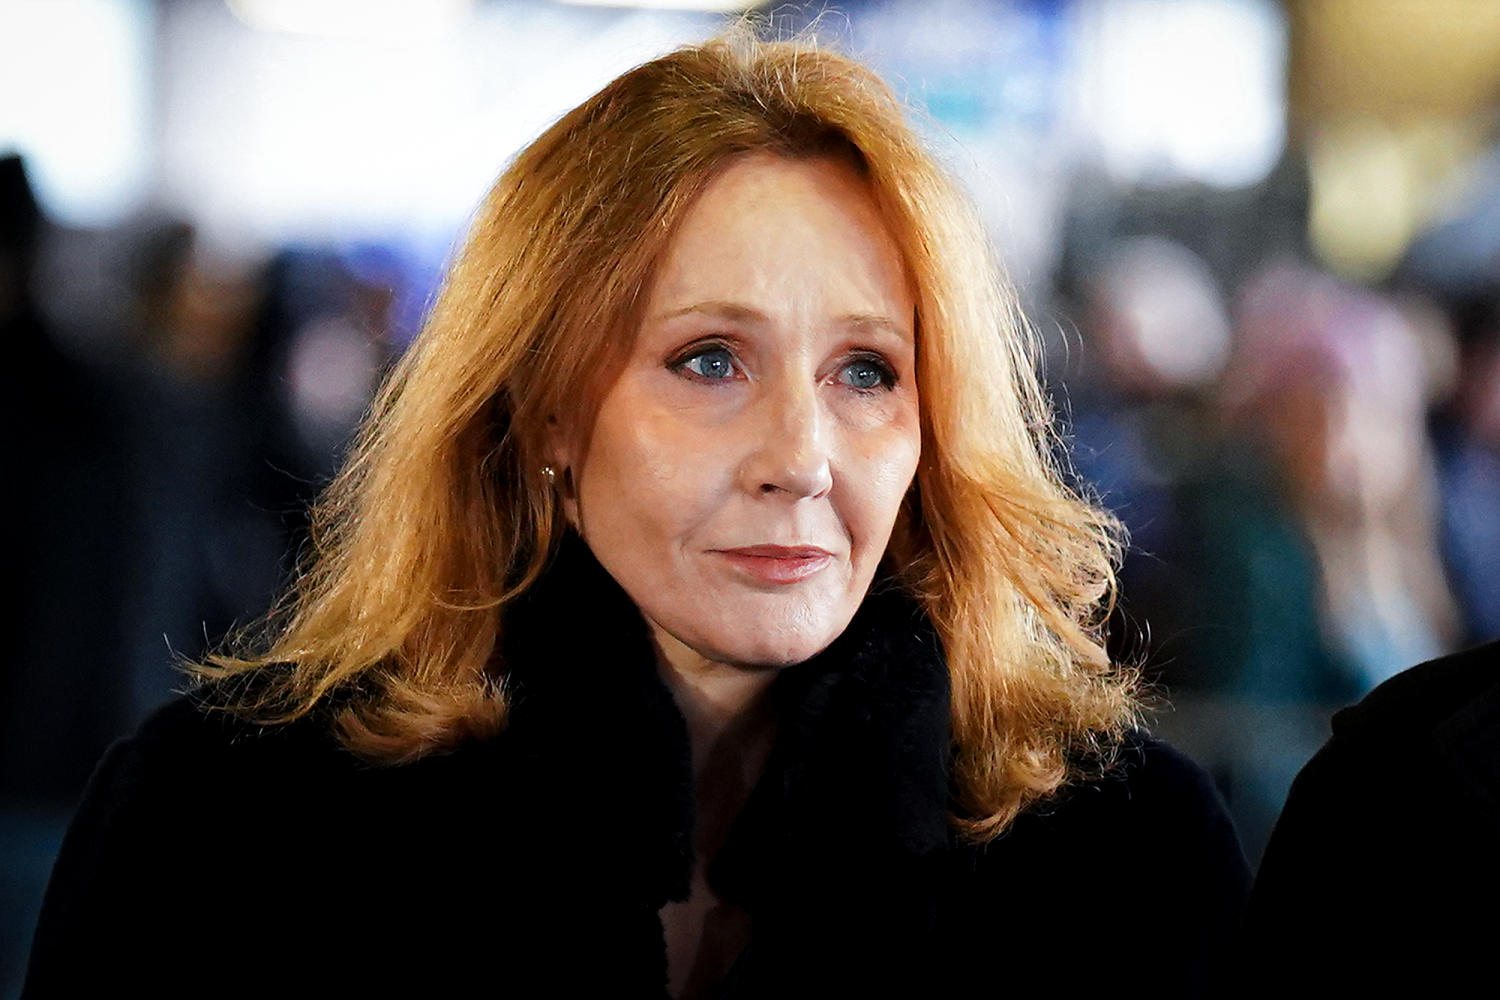 J.K. Rowling will not be arrested for comments about transgender women, police say